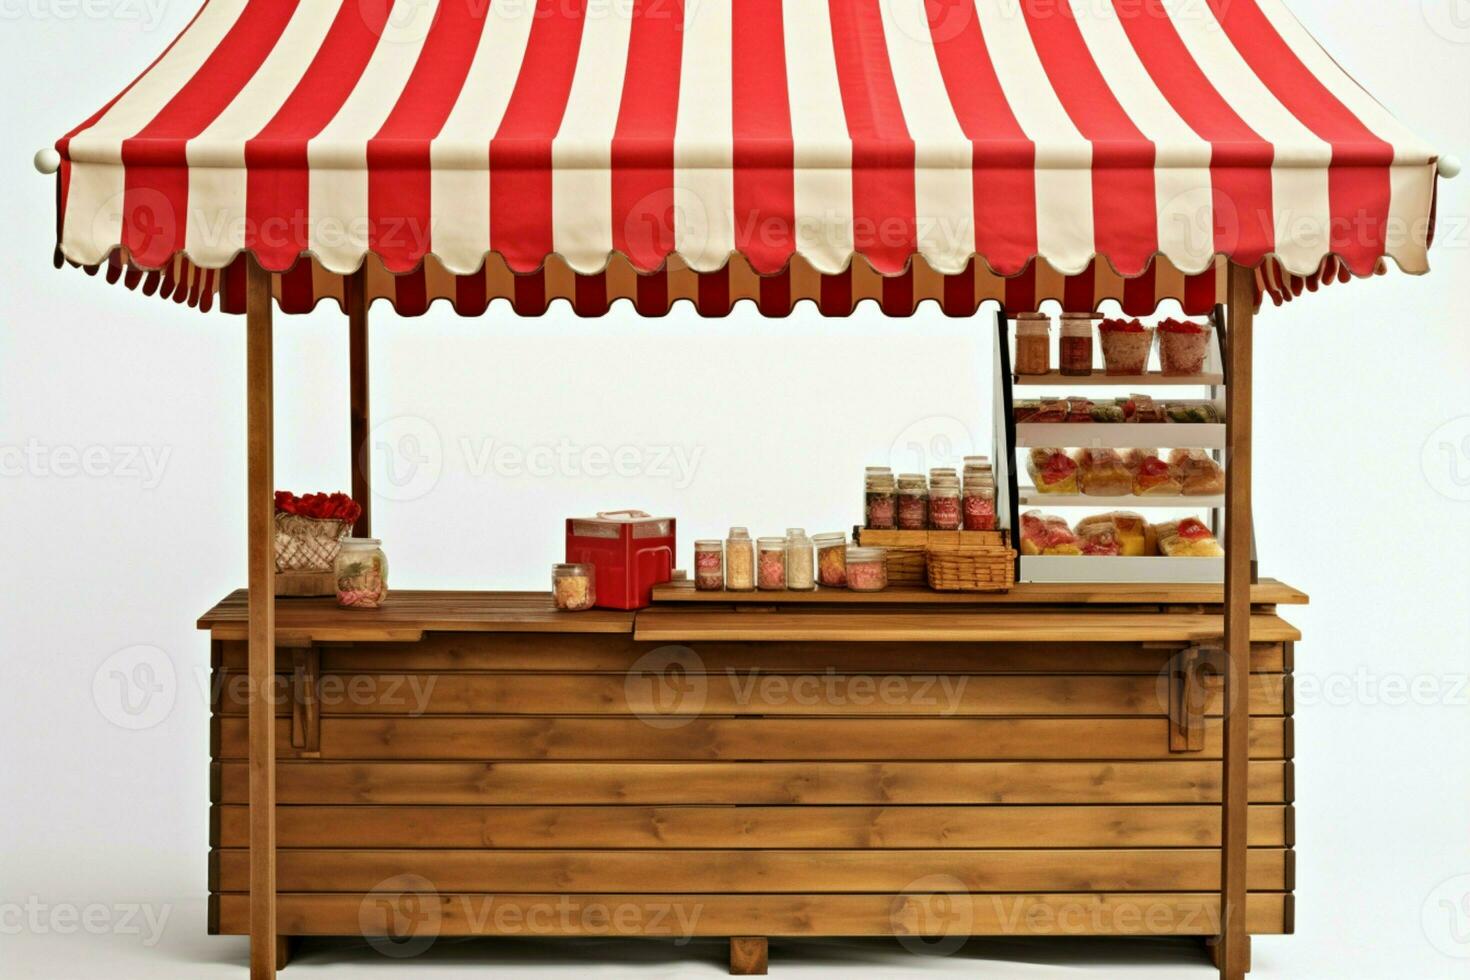 Market stall with a charming wooden stand and striped red white awning AI Generated photo